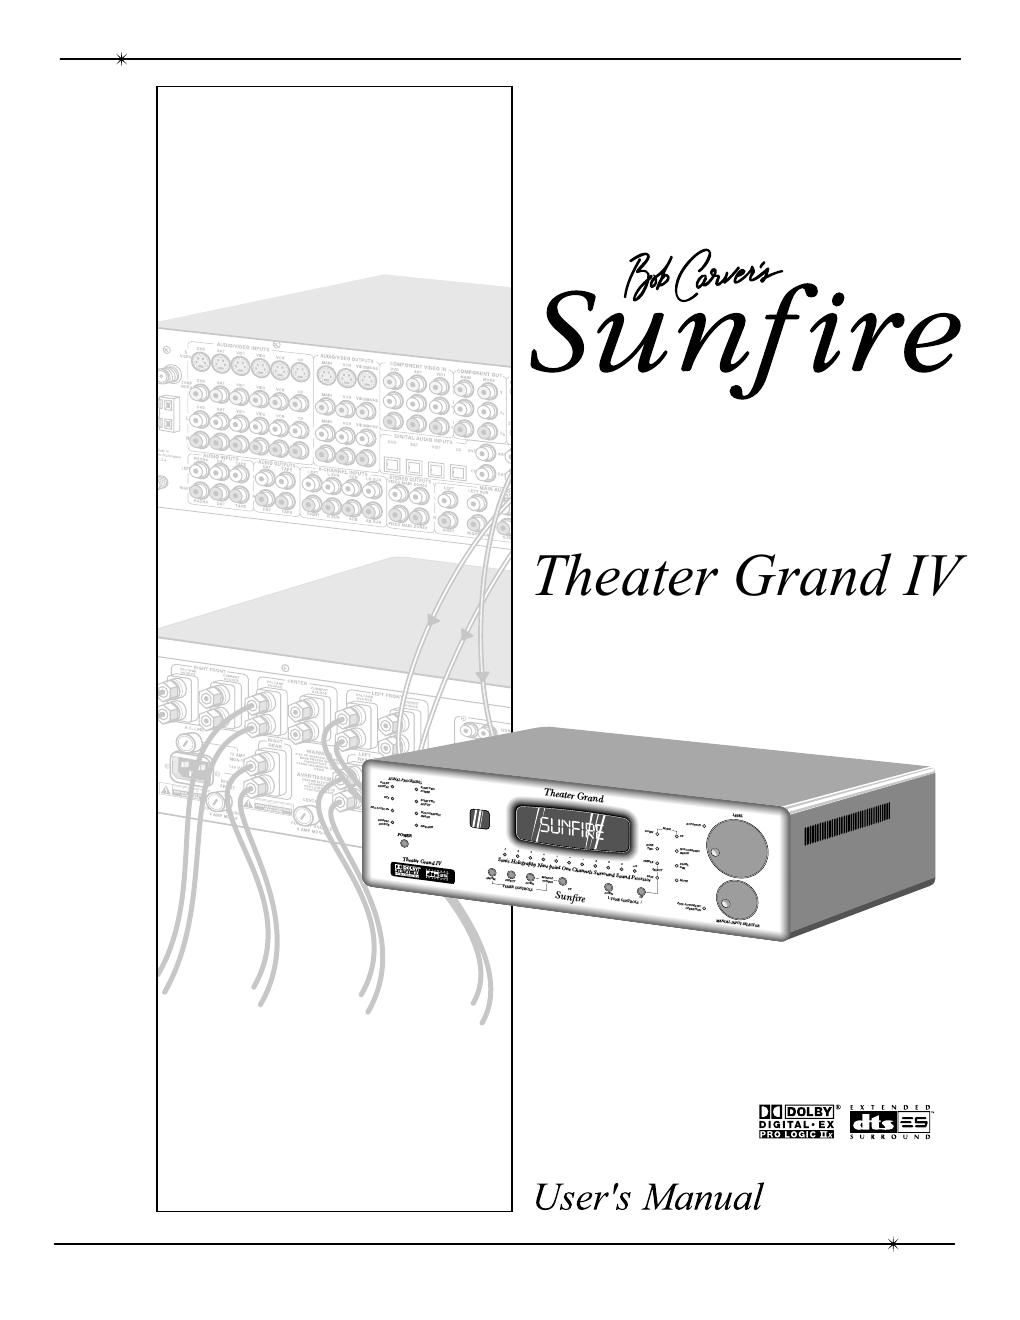 sunfire theater grand 4 owners manual